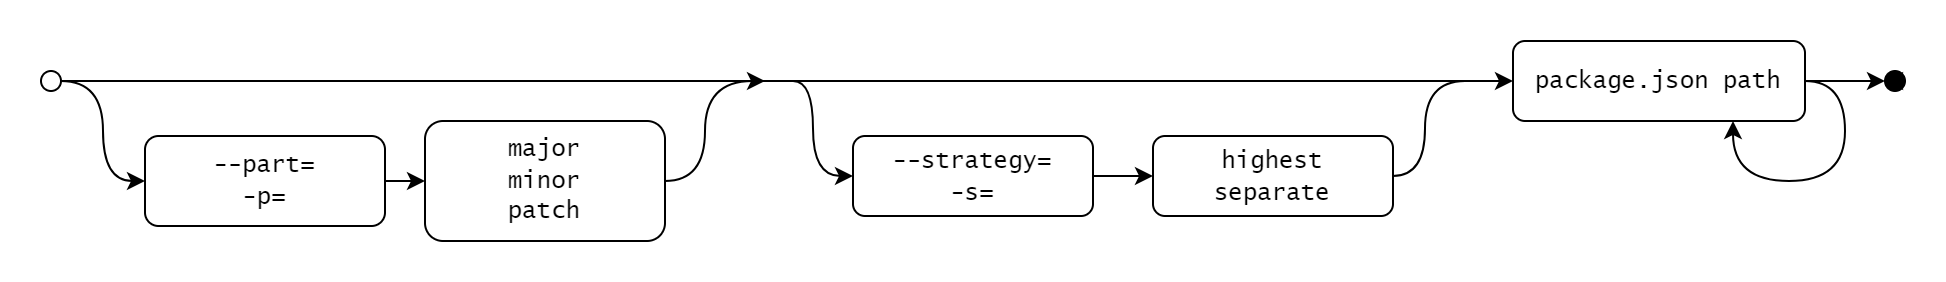 syntax-diagram.png